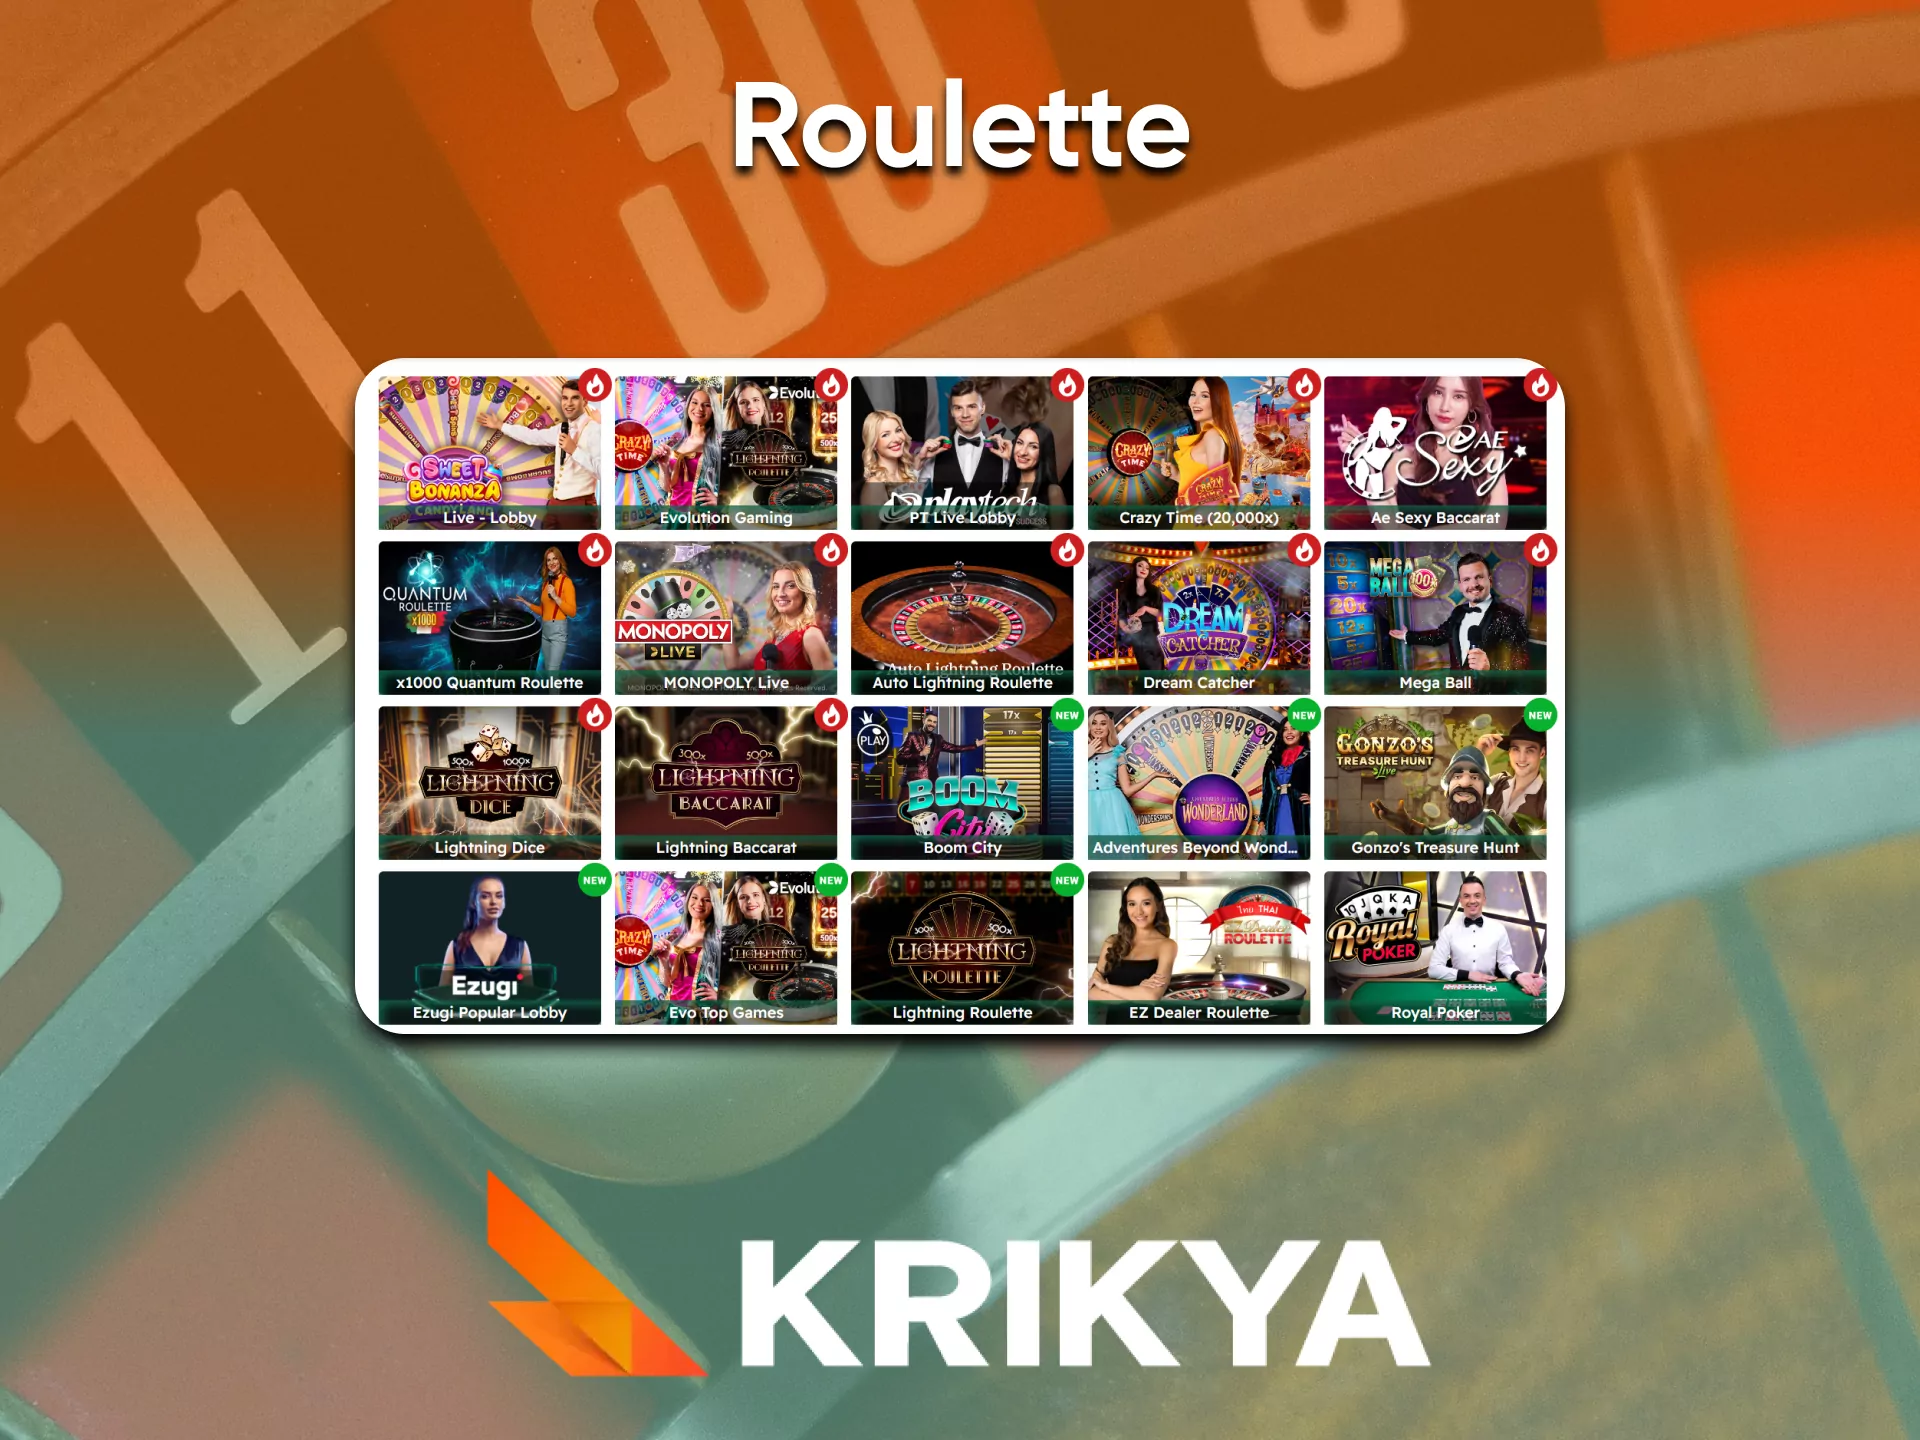 Roulette lovers can play at Krikya Casino.